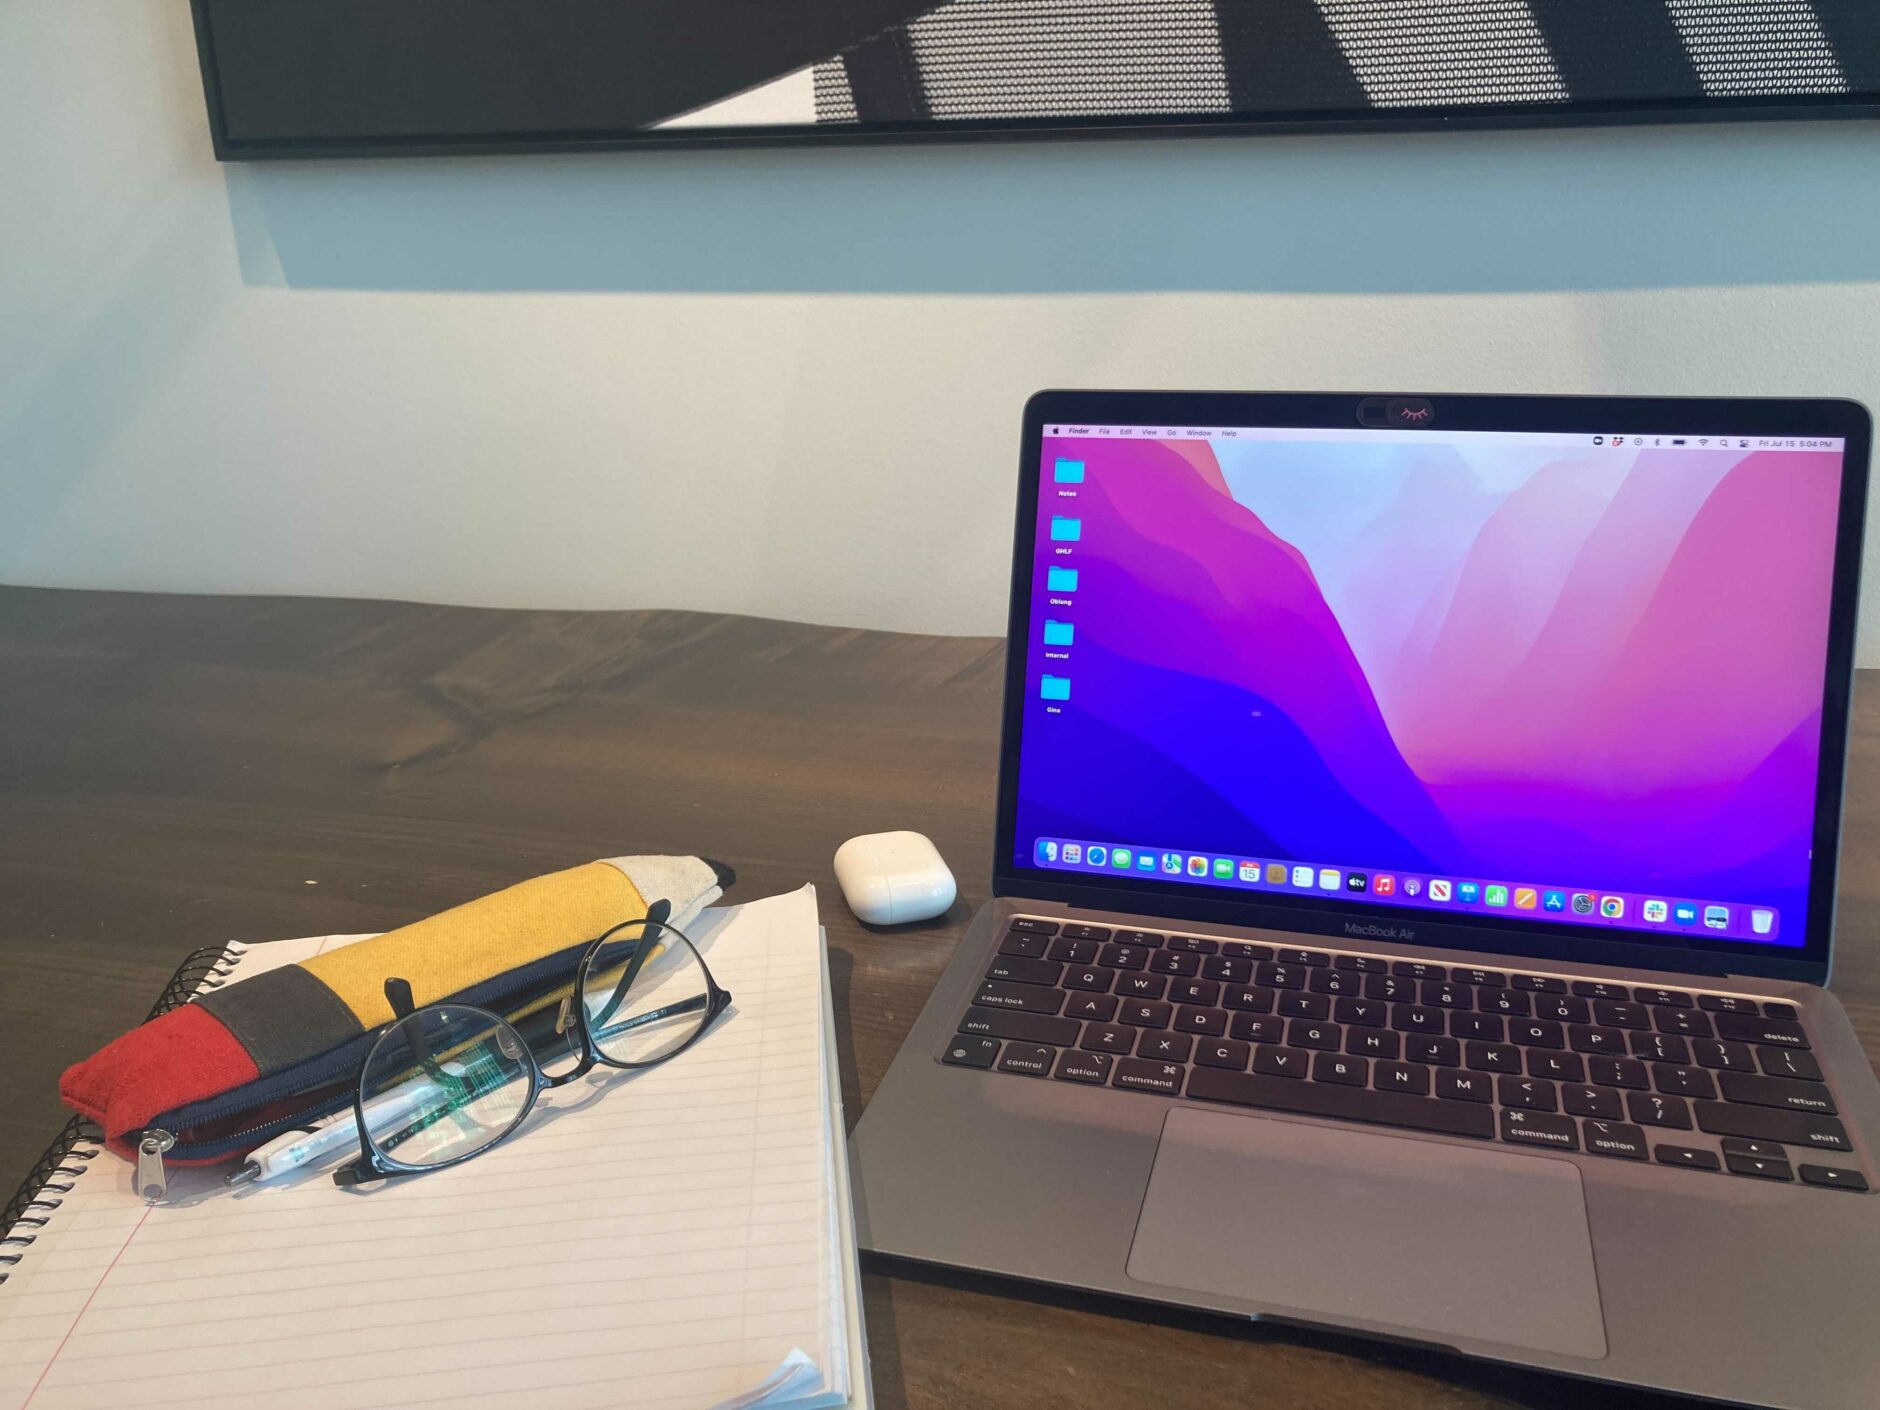 Desk setup with a laptop monitor and a variety of desk items like airpods, glasses, and a pencil shaped pencil case.